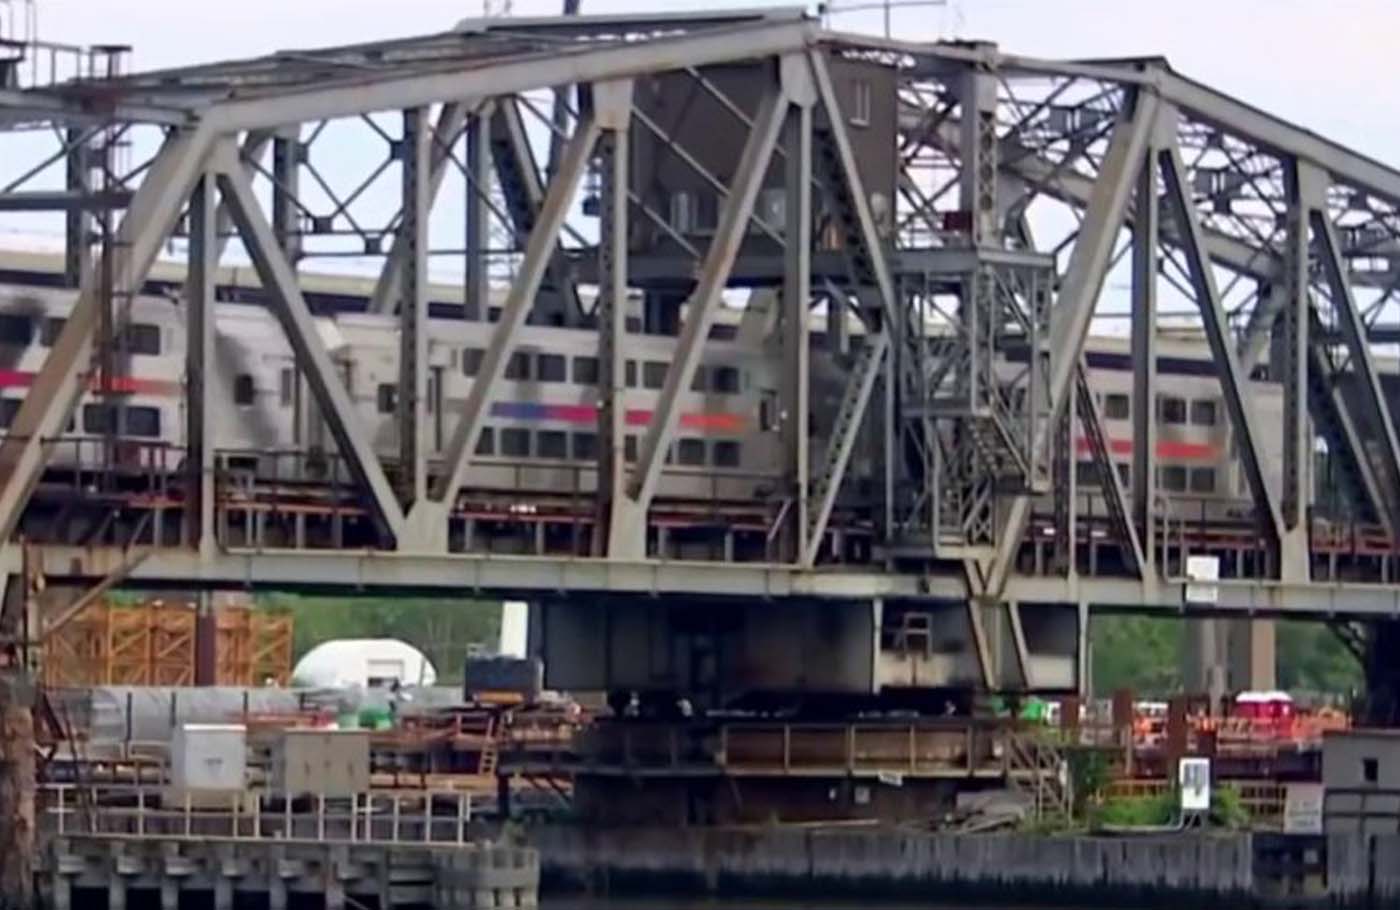 We’re halfway there: Construction on New Portal Bridge is 50% done